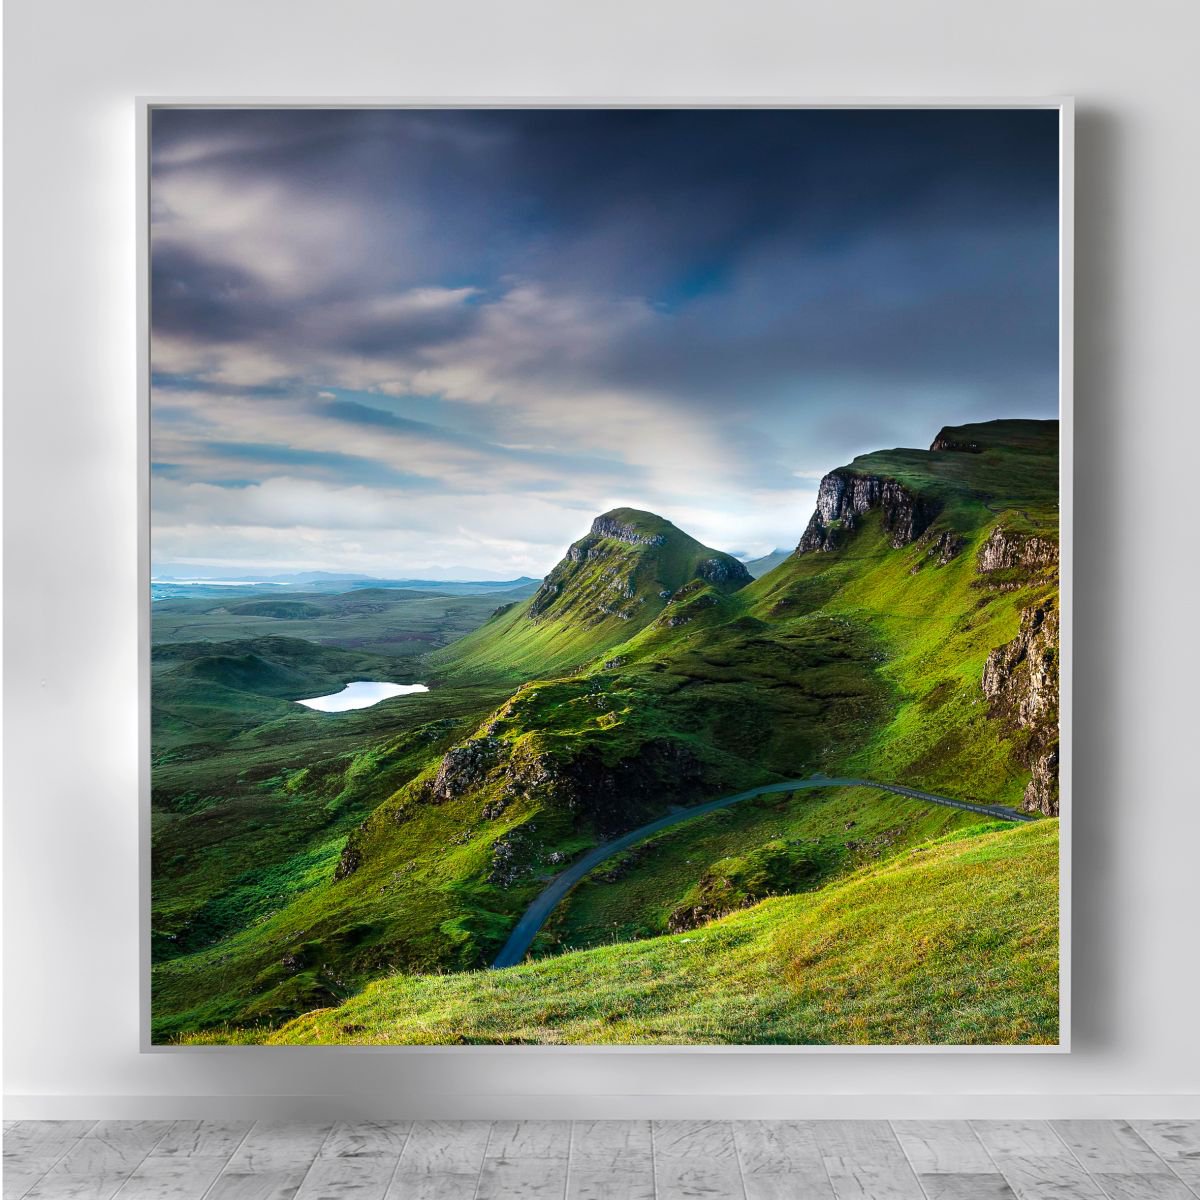 Land of Giants - The Quiraing, Isle of Skye 30 x 30 inches by Lynne Douglas